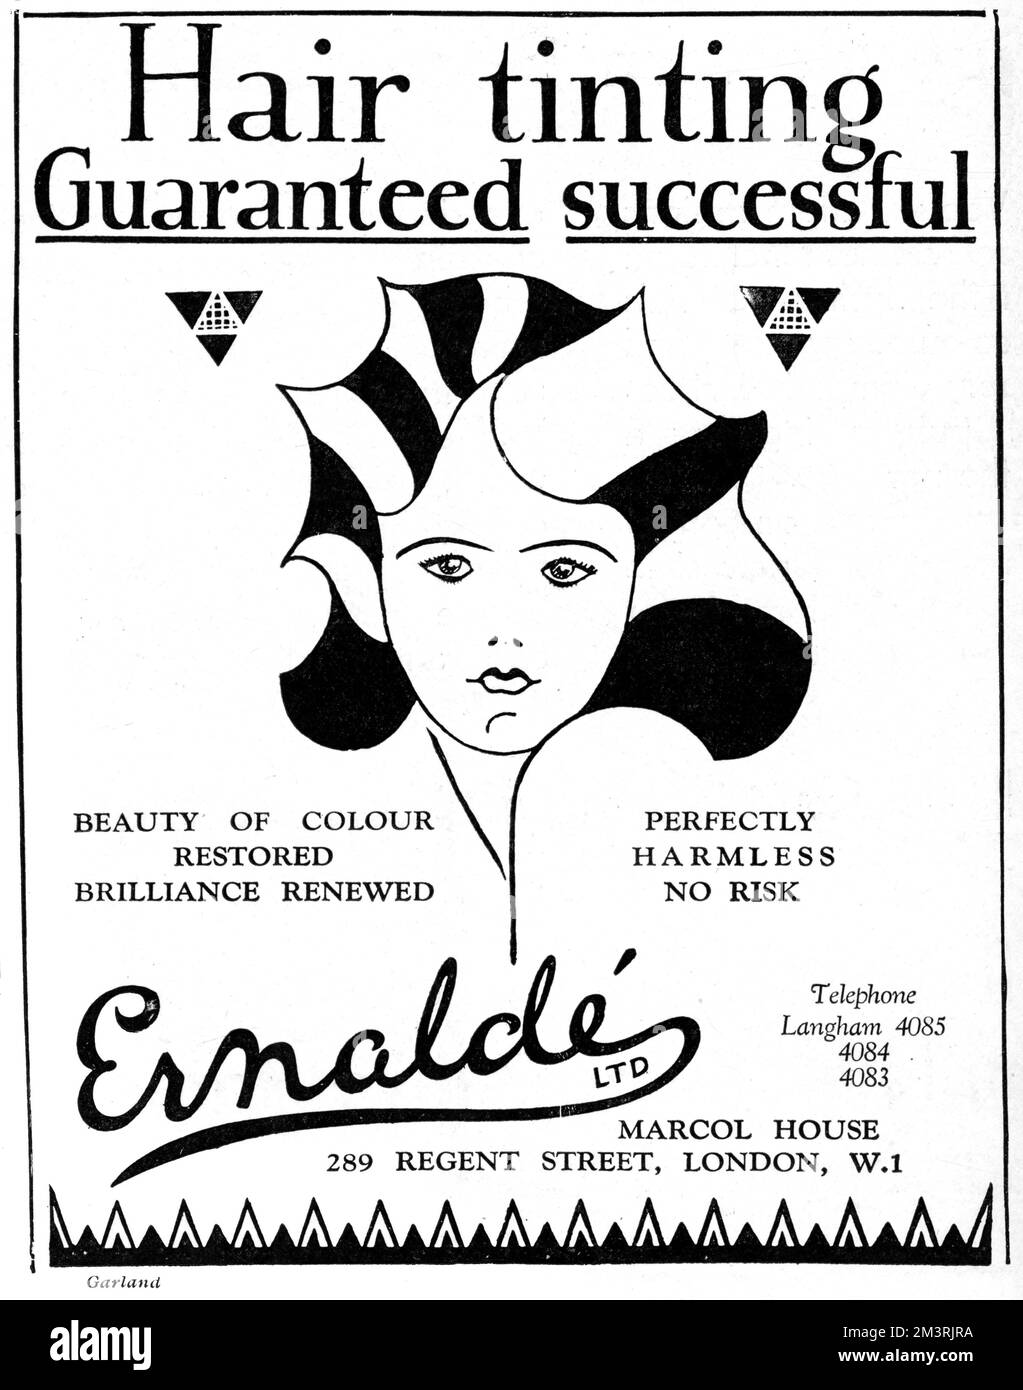 Advertisement for Ernalde hair tinting - guaranteed successful, though from the accompanying Cruella de Vil example, I'm not entirely sure I agree.  1930 Stock Photo